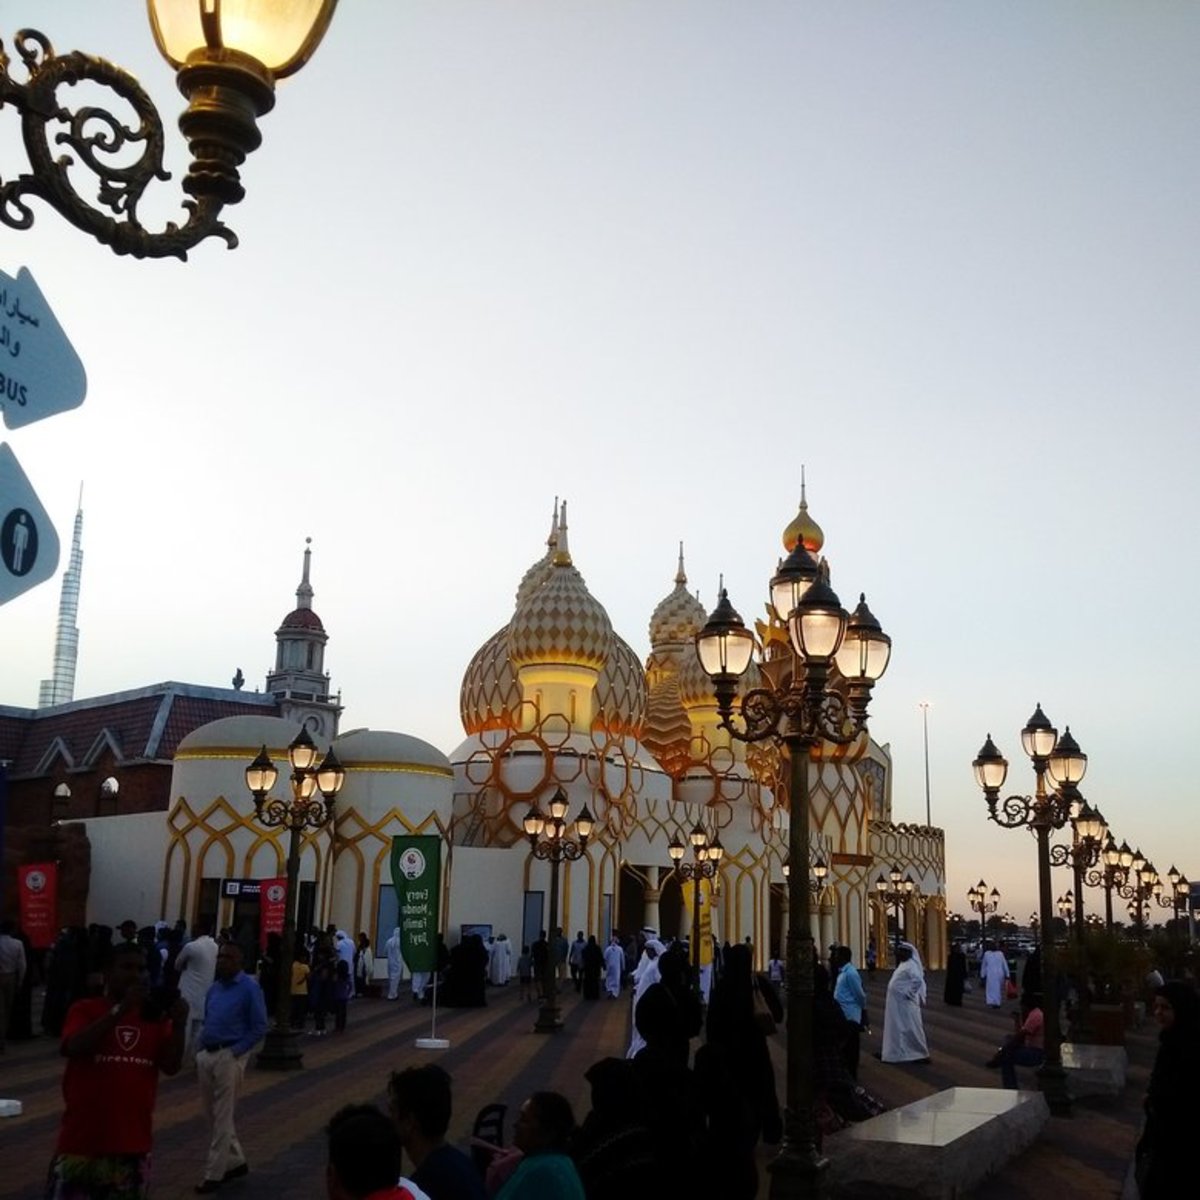 Visiting the Global Village in Dubai